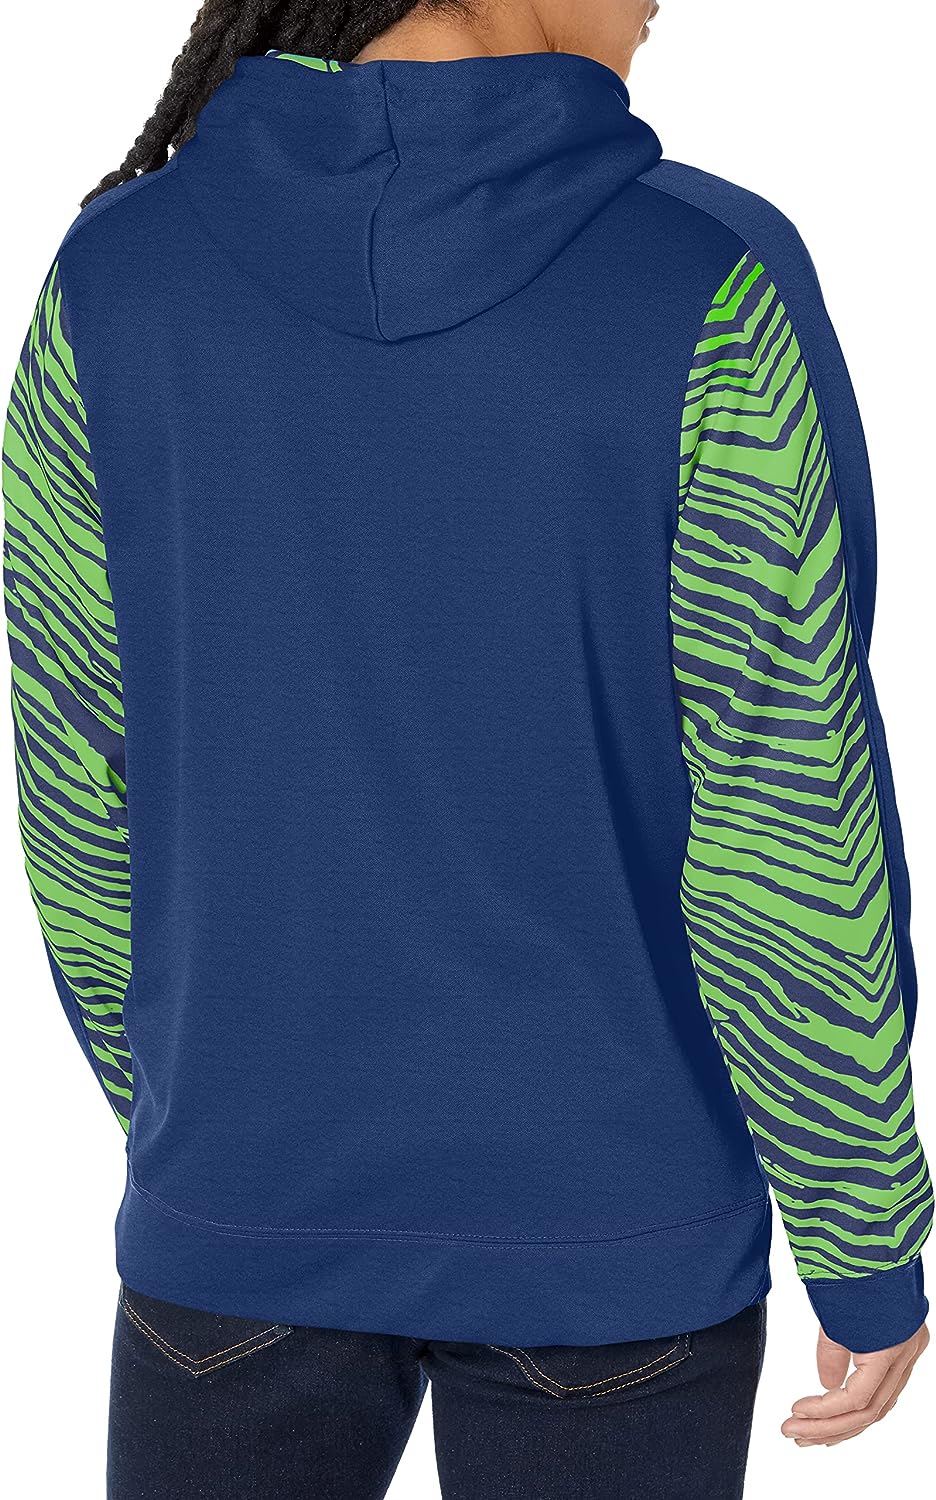 Zubaz NFL Men's Seattle Seahawks Team Color with Zebra Accents Pullover Hoodie